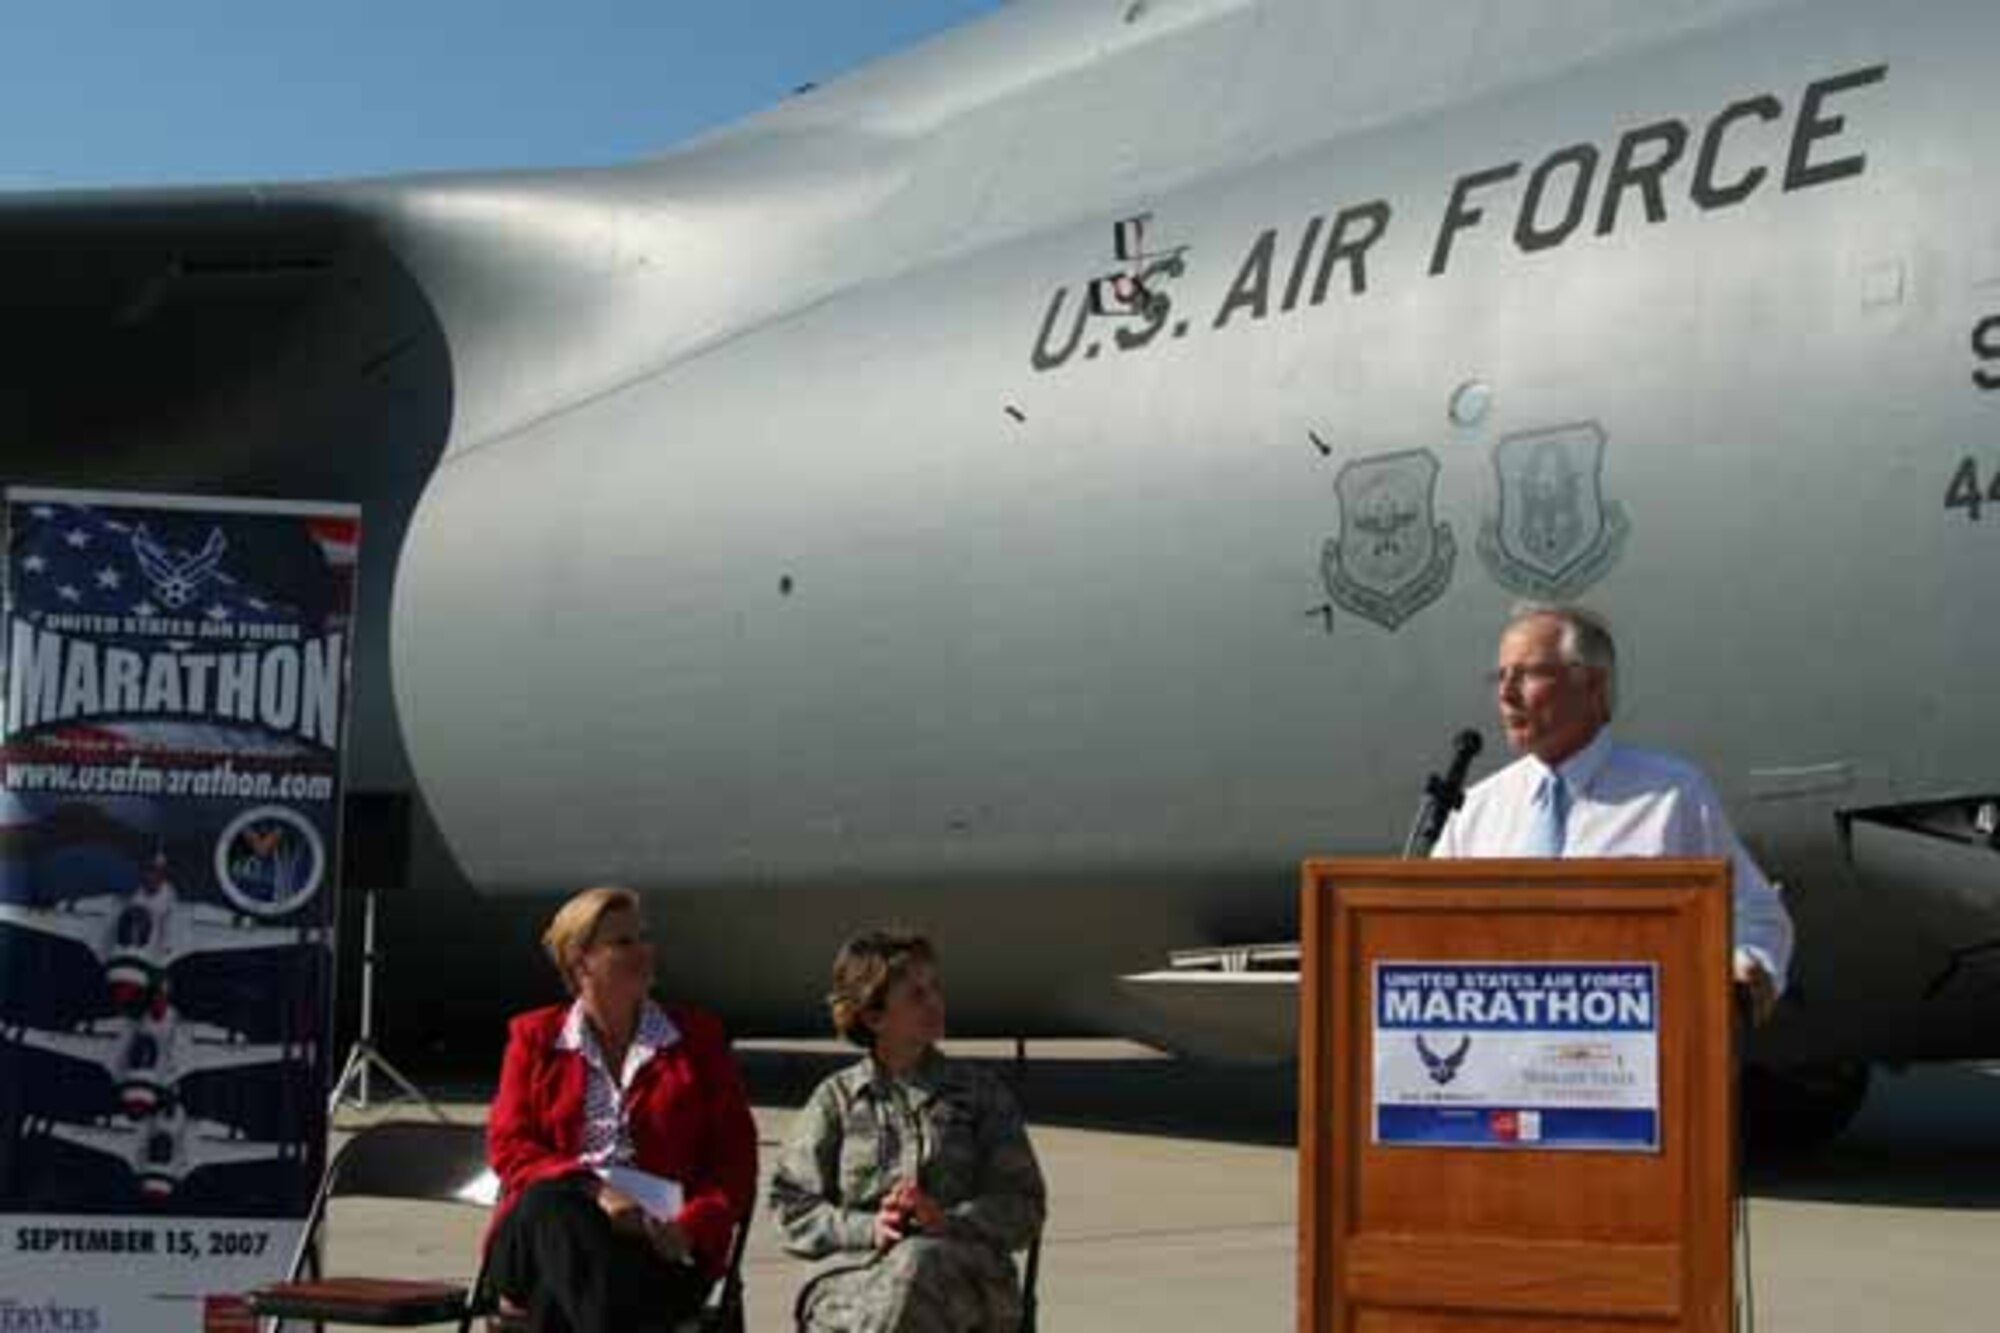 Leadership from both the Air Force and Wright State University gather at a press conference June 13 at Wright-Patterson Air Force Base, Ohio to discuss their new USAF Marathon partnership, and other details of the September race. On the flightline of the 445th Airlift Wing in front of a massive C-5 Galaxy -- the featured aircraft of the 11th annual race – are Lt. Gen. Terry Gabreski, vice commander of Air Force Materiel Command, Molly Louden, director of the USAF Marathon, and David R. Hopkins, president of Wright State University, who all took turns speaking to nearly two dozen media members. (Air Force photo by Kathleen A.K. Lopez)